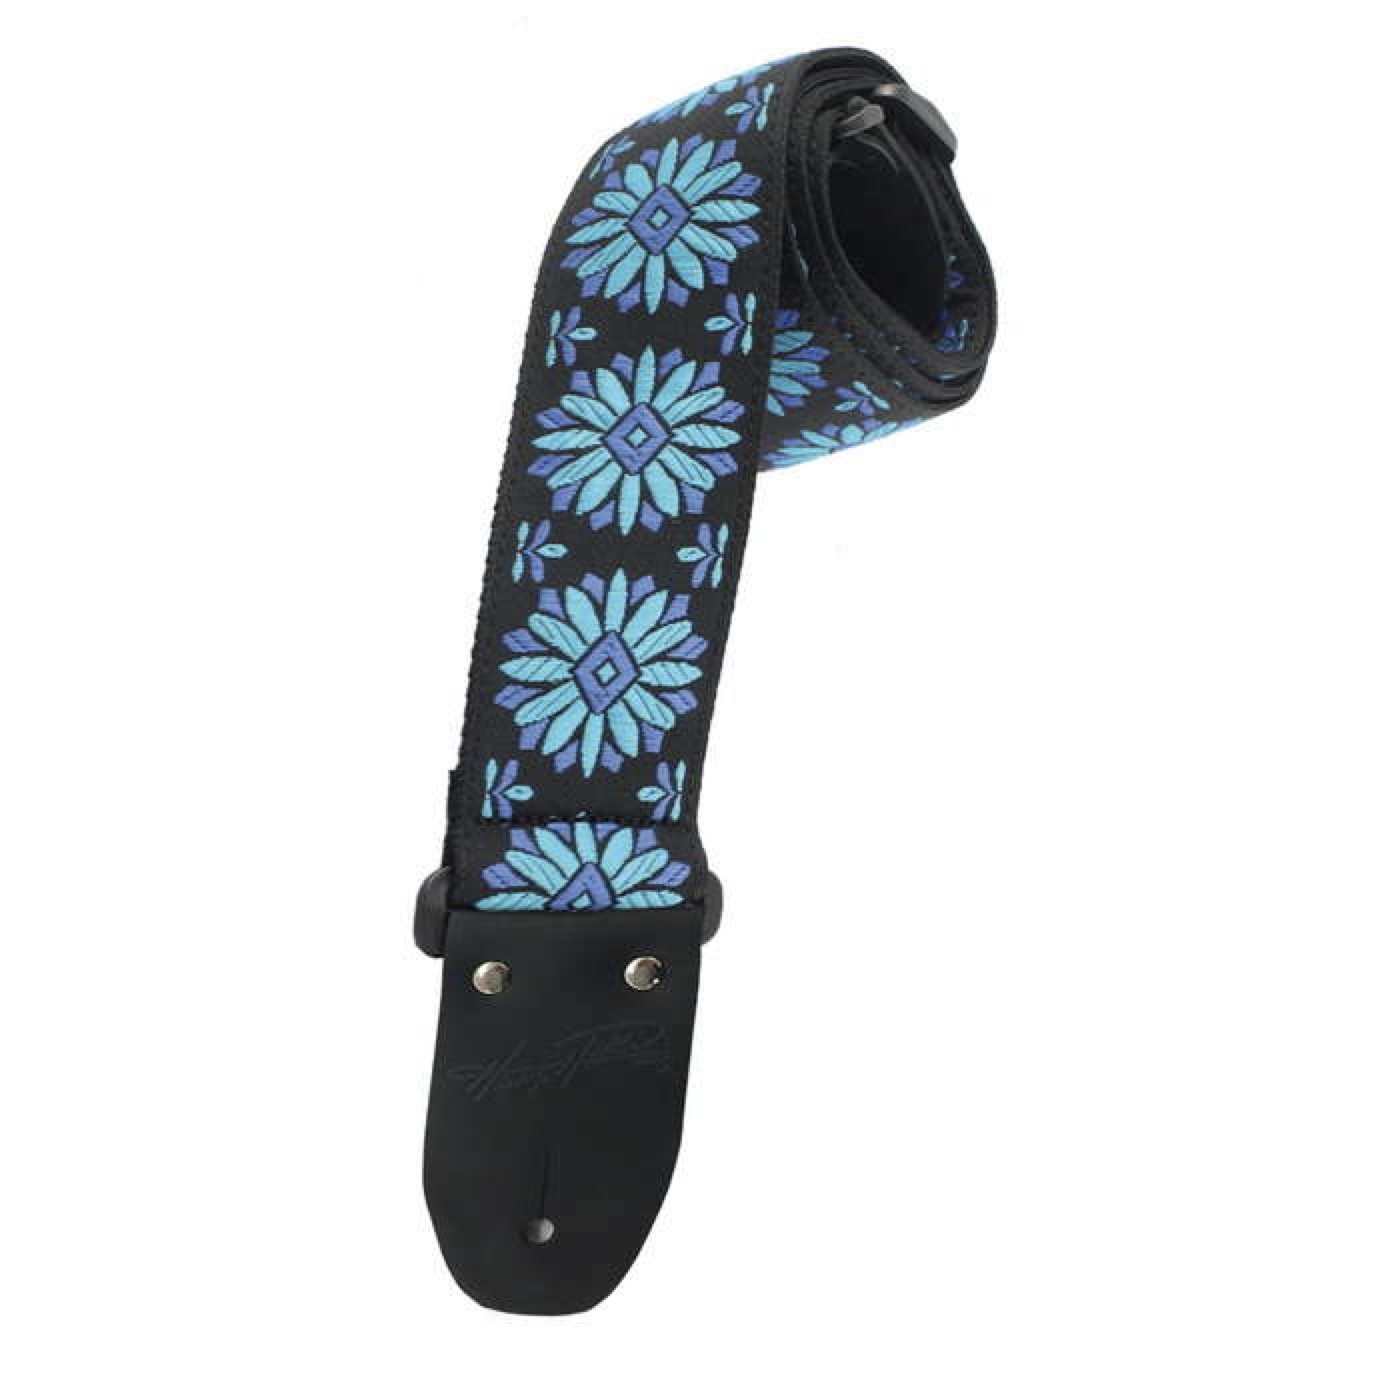 Henry Heller 2" Guitar Strap, Woven Jaquard with Tri-Glide and Nylon Backing, Blue/Black (USA)